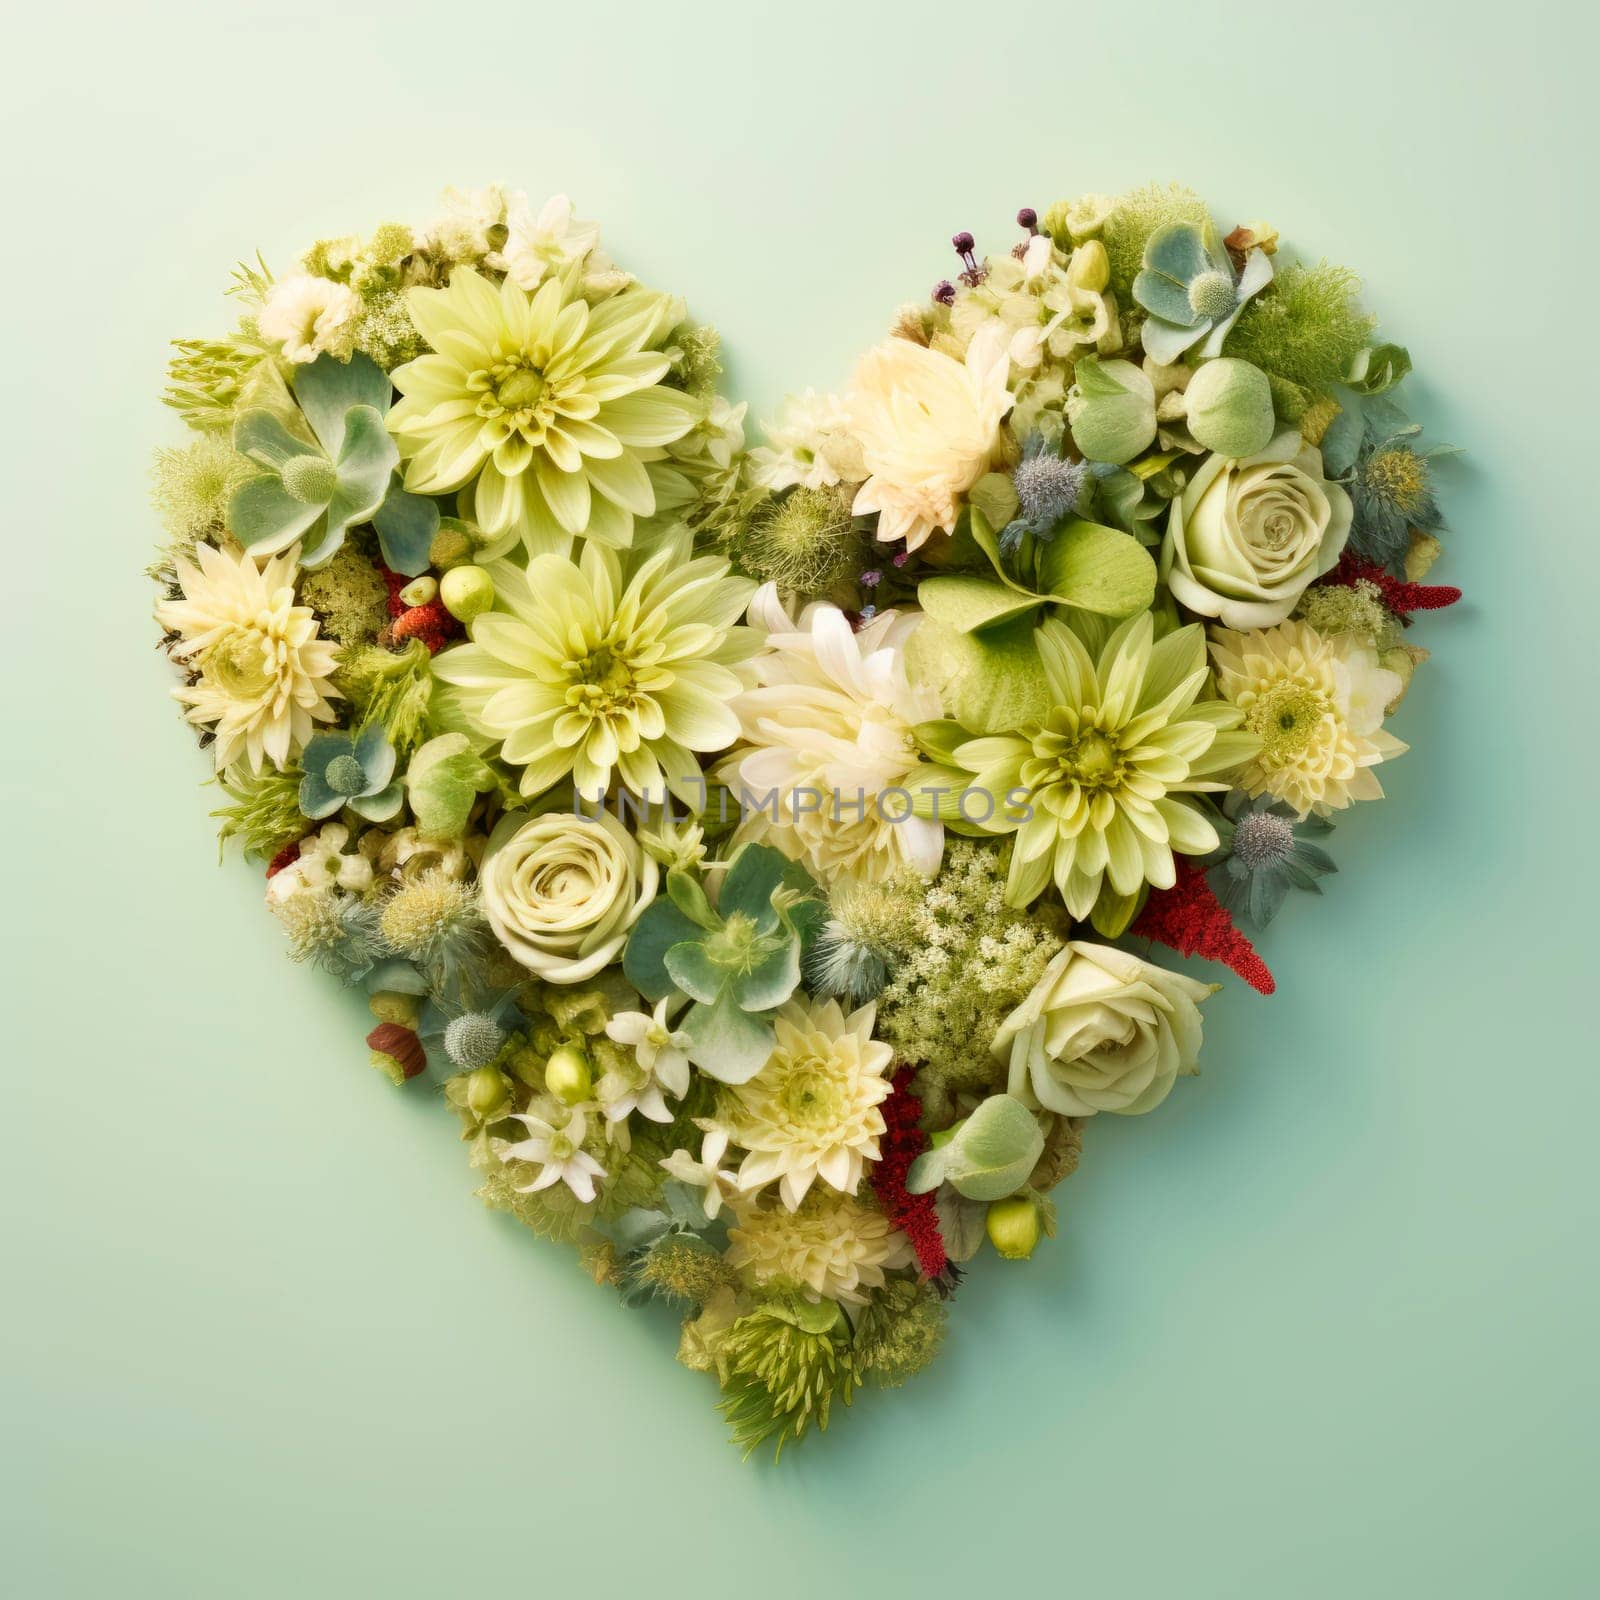 The heart is lined with beautiful succulents and flowers on a light background. by Spirina